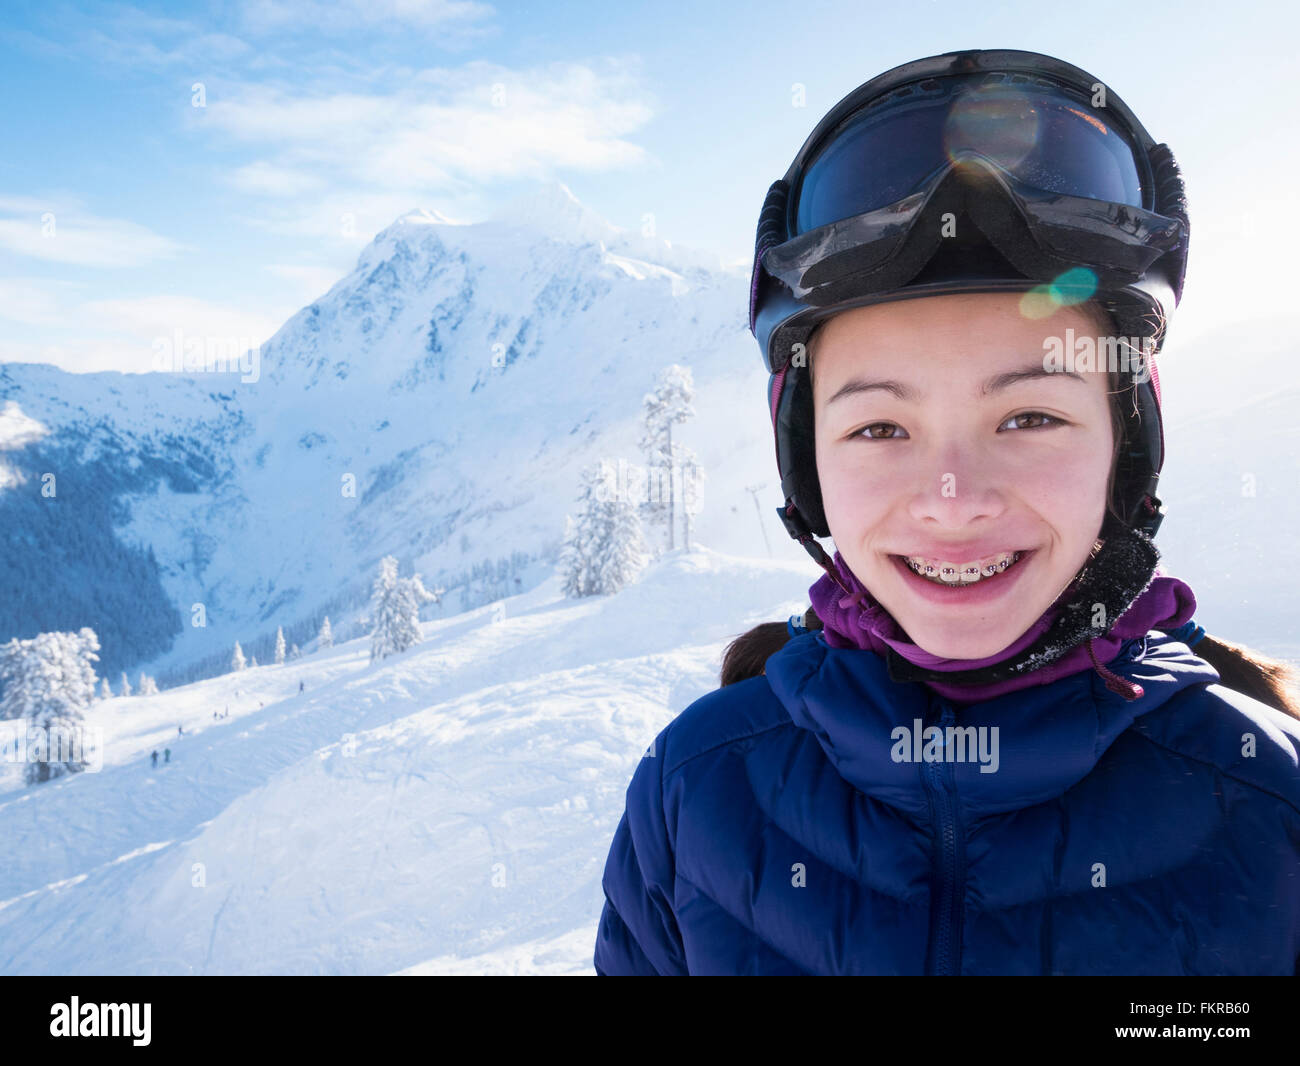 Mixed Race girl smiling on snowy mountain Banque D'Images